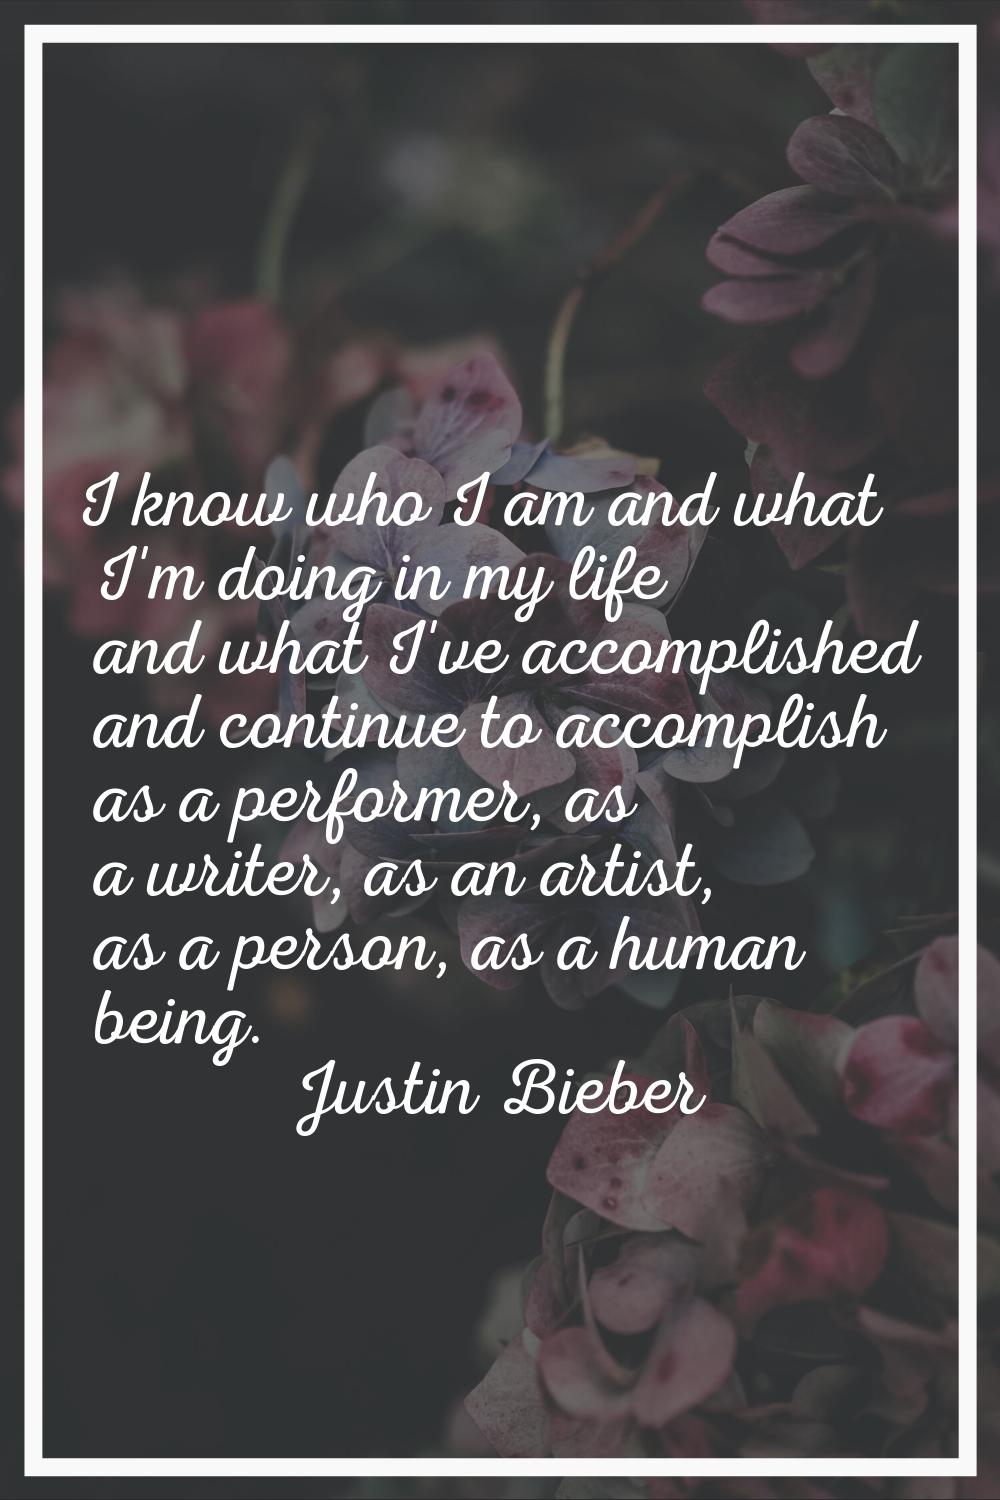 I know who I am and what I'm doing in my life and what I've accomplished and continue to accomplish